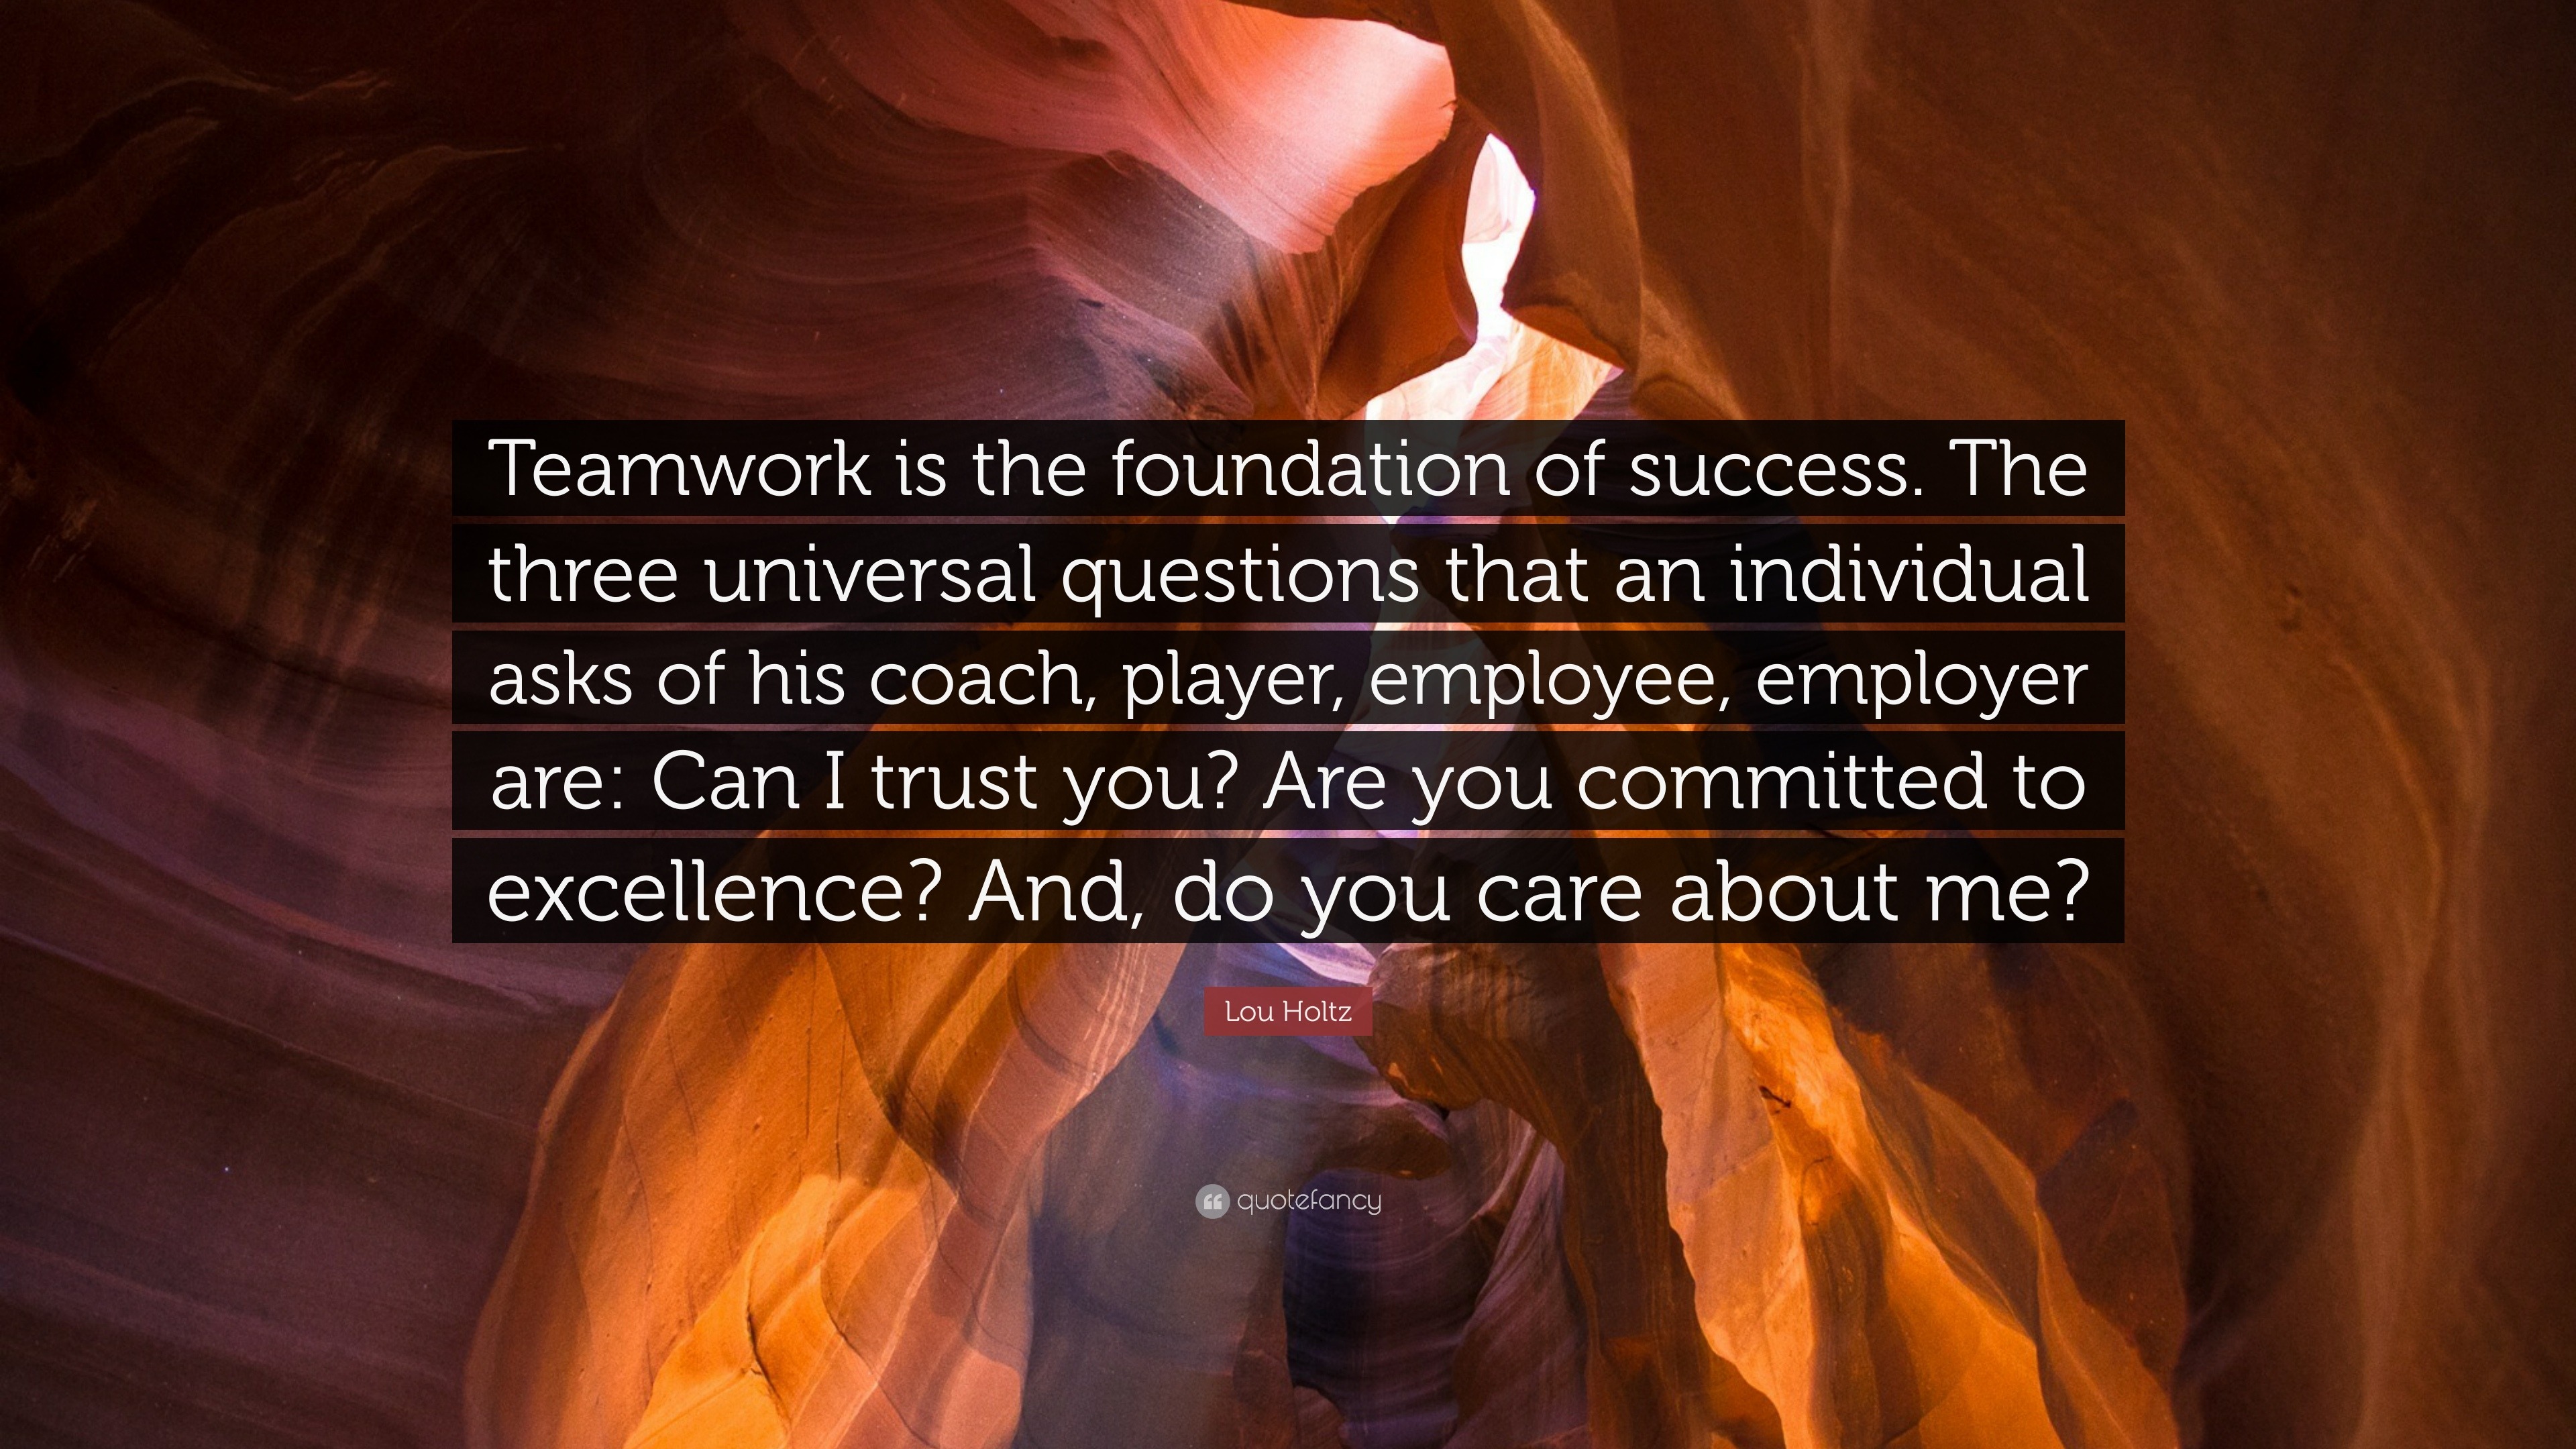 Lou Holtz Quote: “Teamwork is the foundation of success. The three